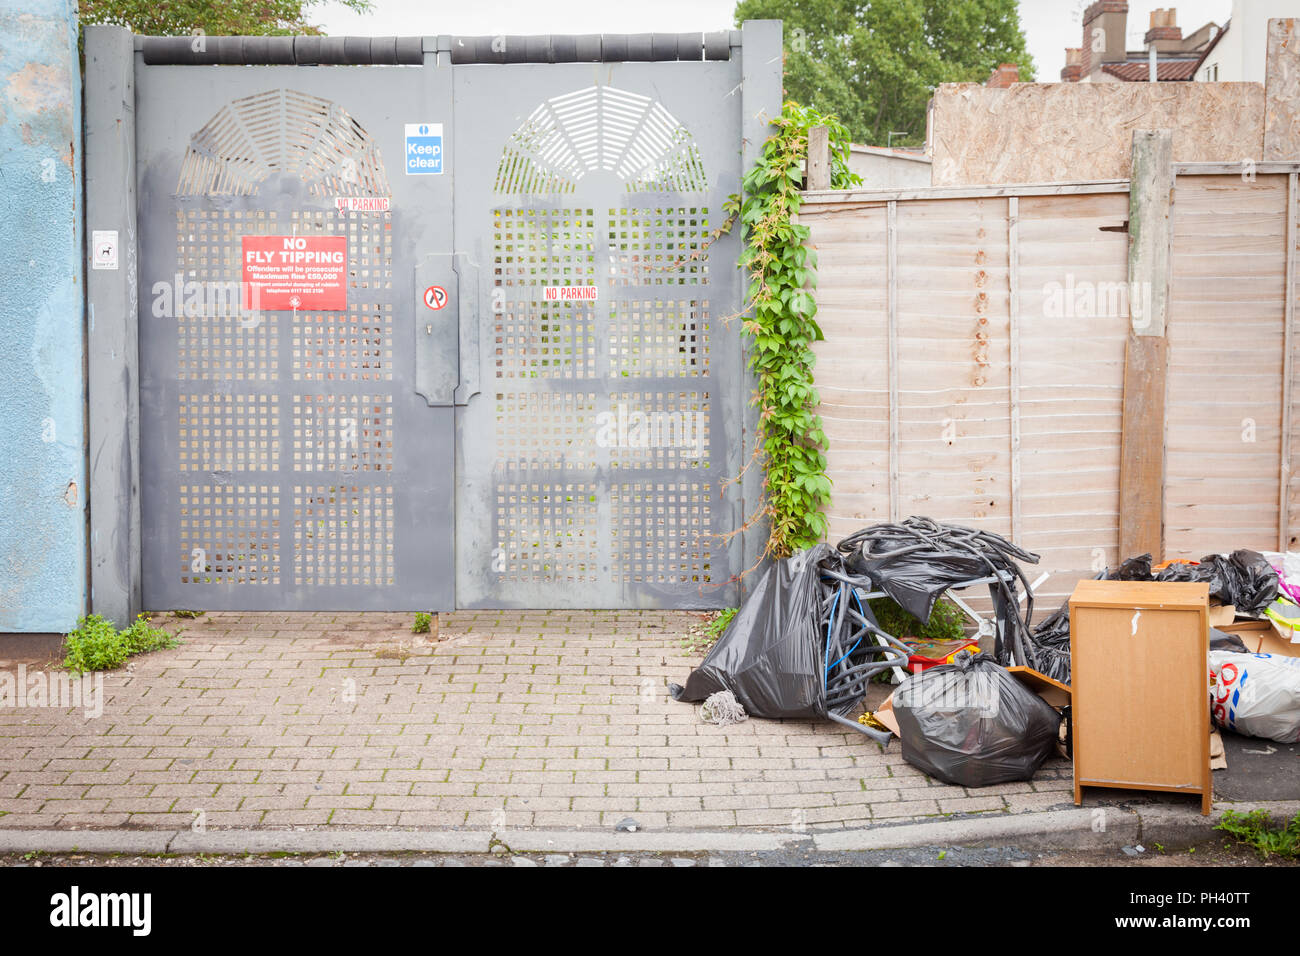 Rubbish or garbage dumped or fly tipping in a street in Bristol UK Stock Photo